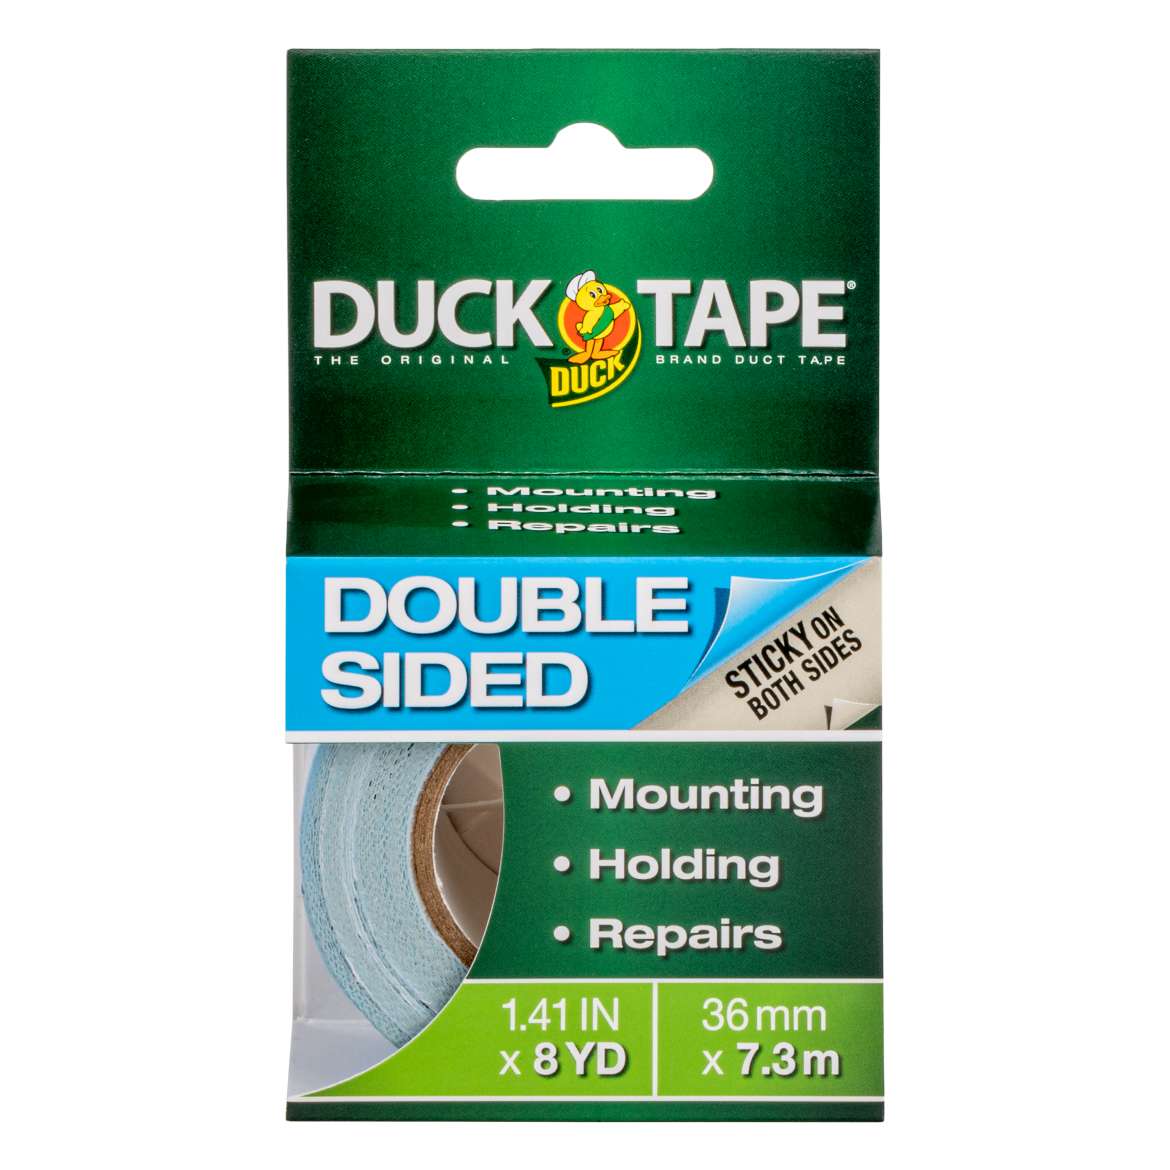 Double Sided Duck Tape® Image